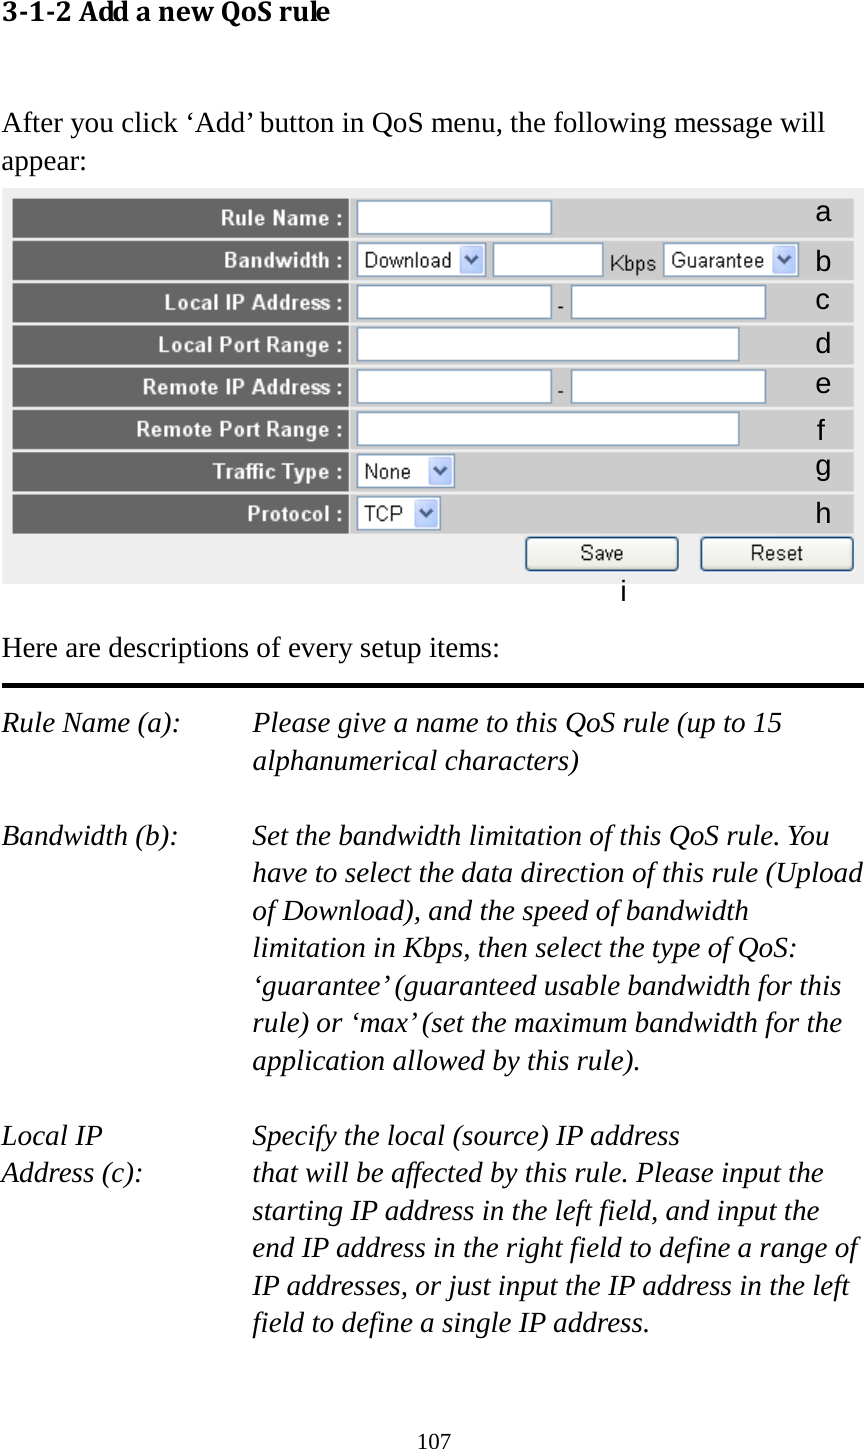 107 3-1-2 Add a new QoS rule  After you click ‘Add’ button in QoS menu, the following message will appear:   Here are descriptions of every setup items:  Rule Name (a):   Please give a name to this QoS rule (up to 15 alphanumerical characters)  Bandwidth (b):   Set the bandwidth limitation of this QoS rule. You have to select the data direction of this rule (Upload of Download), and the speed of bandwidth limitation in Kbps, then select the type of QoS: ‘guarantee’ (guaranteed usable bandwidth for this rule) or ‘max’ (set the maximum bandwidth for the application allowed by this rule).  Local IP        Specify the local (source) IP address Address (c):     that will be affected by this rule. Please input the starting IP address in the left field, and input the end IP address in the right field to define a range of IP addresses, or just input the IP address in the left field to define a single IP address.  a b c d e f g h i 